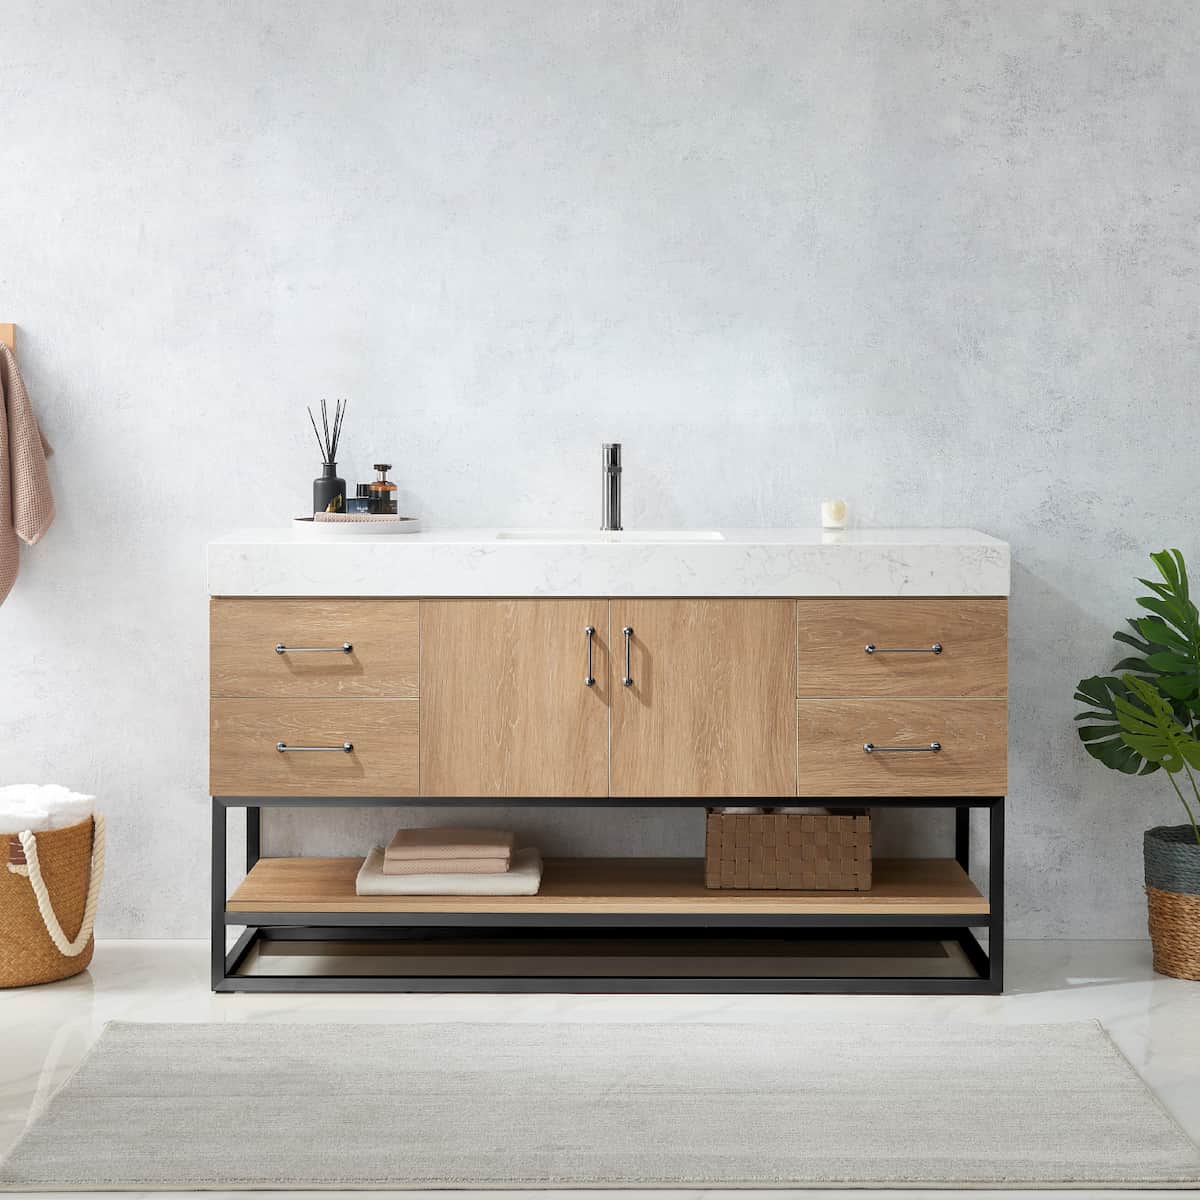 Vinnova Alistair 60 Inch Freestanding Single Vanity in North American Oak and Matte Black Frame with White Grain Stone Countertop Without Mirror in Bathroom 789060BS-NO-GW-NM